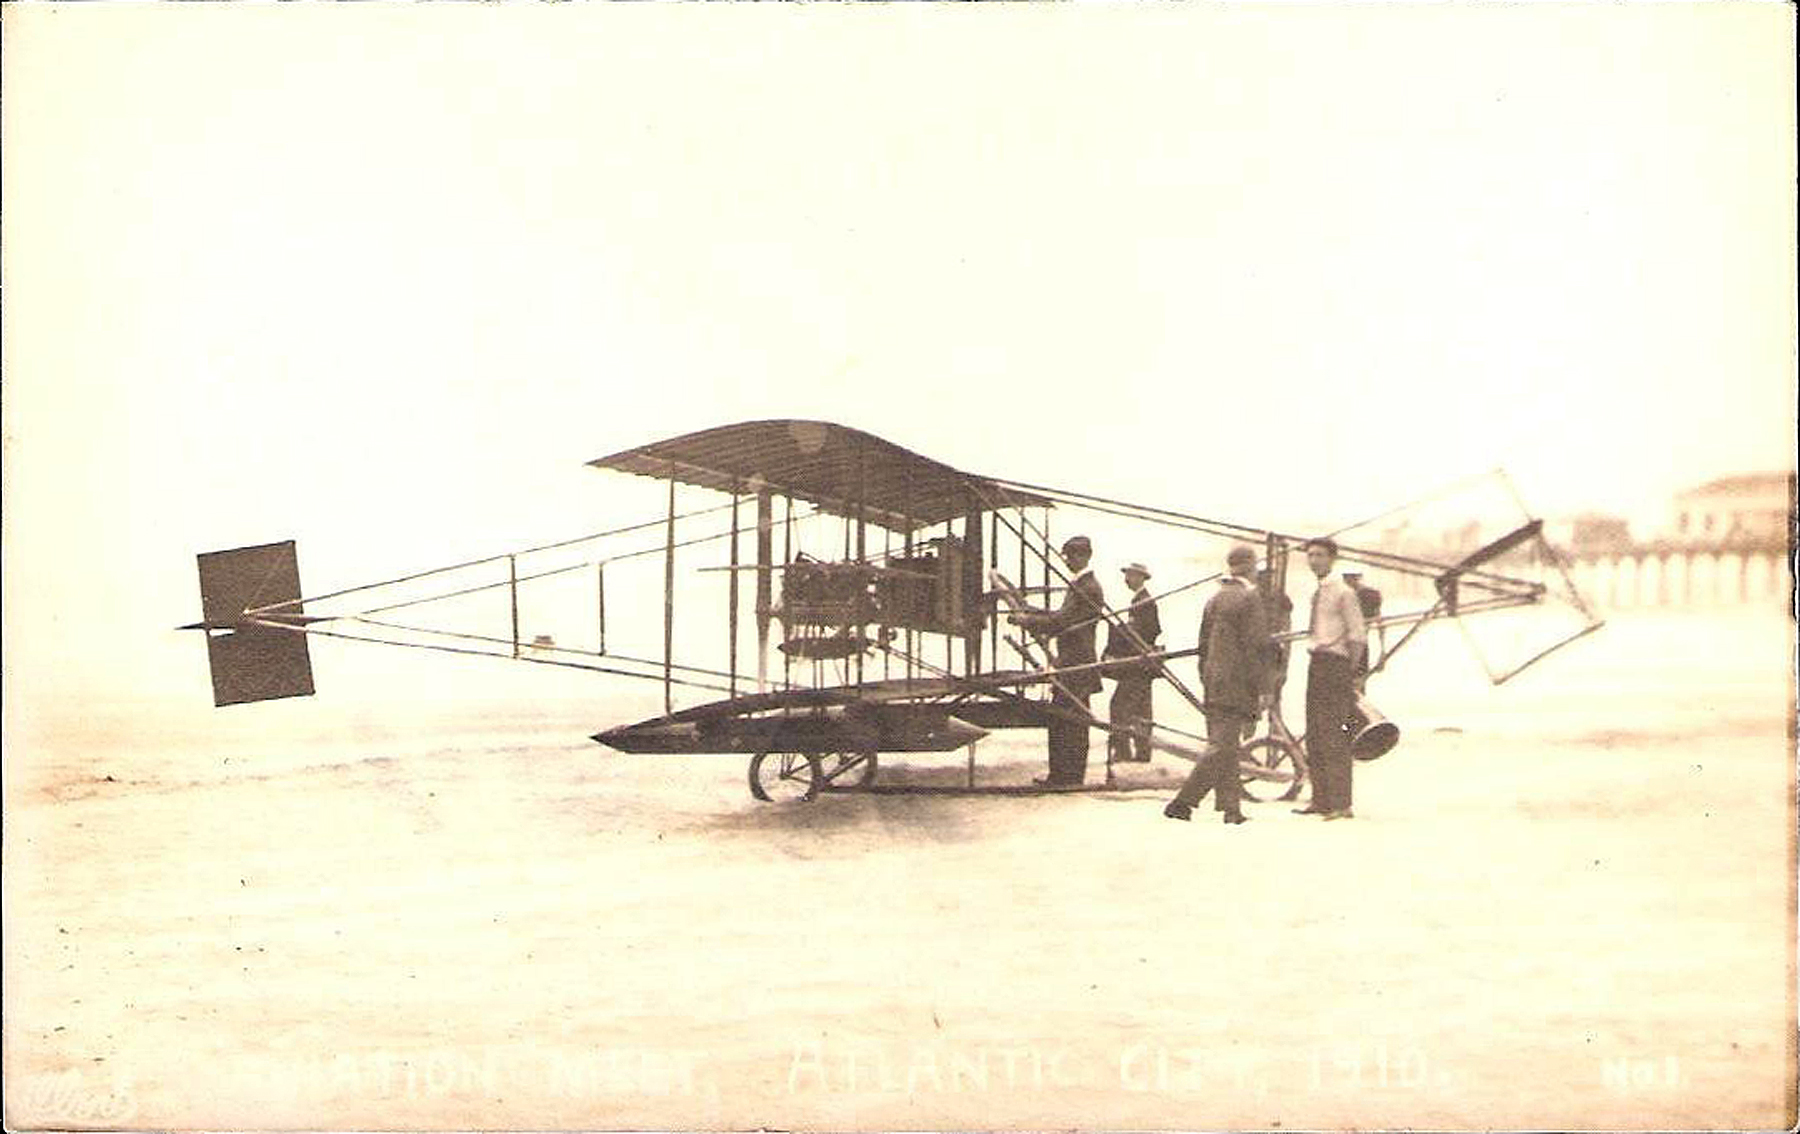 Atlantic City - Apparently a moment from the 1910 Aviation Meet - 1910